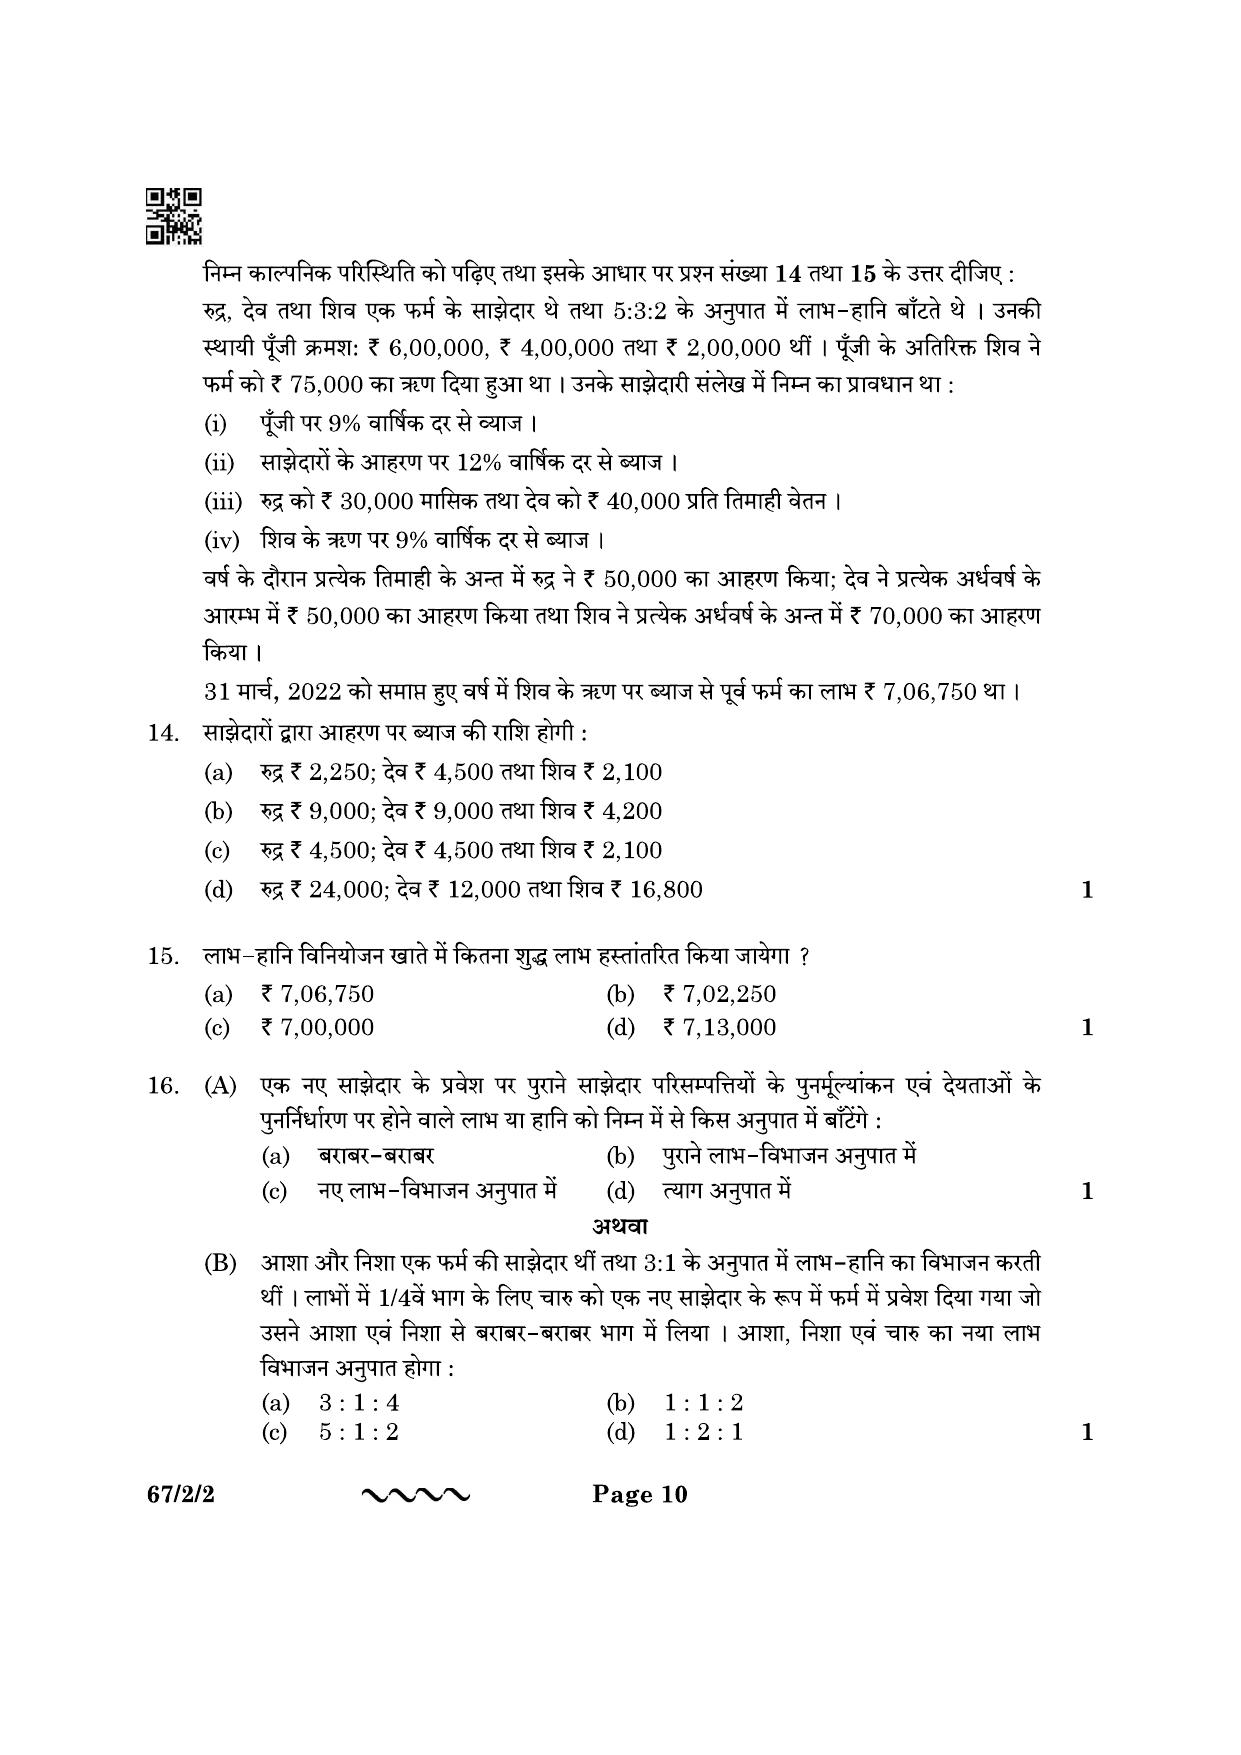 CBSE Class 12 67-2-2 Accountancy 2023 Question Paper - Page 10